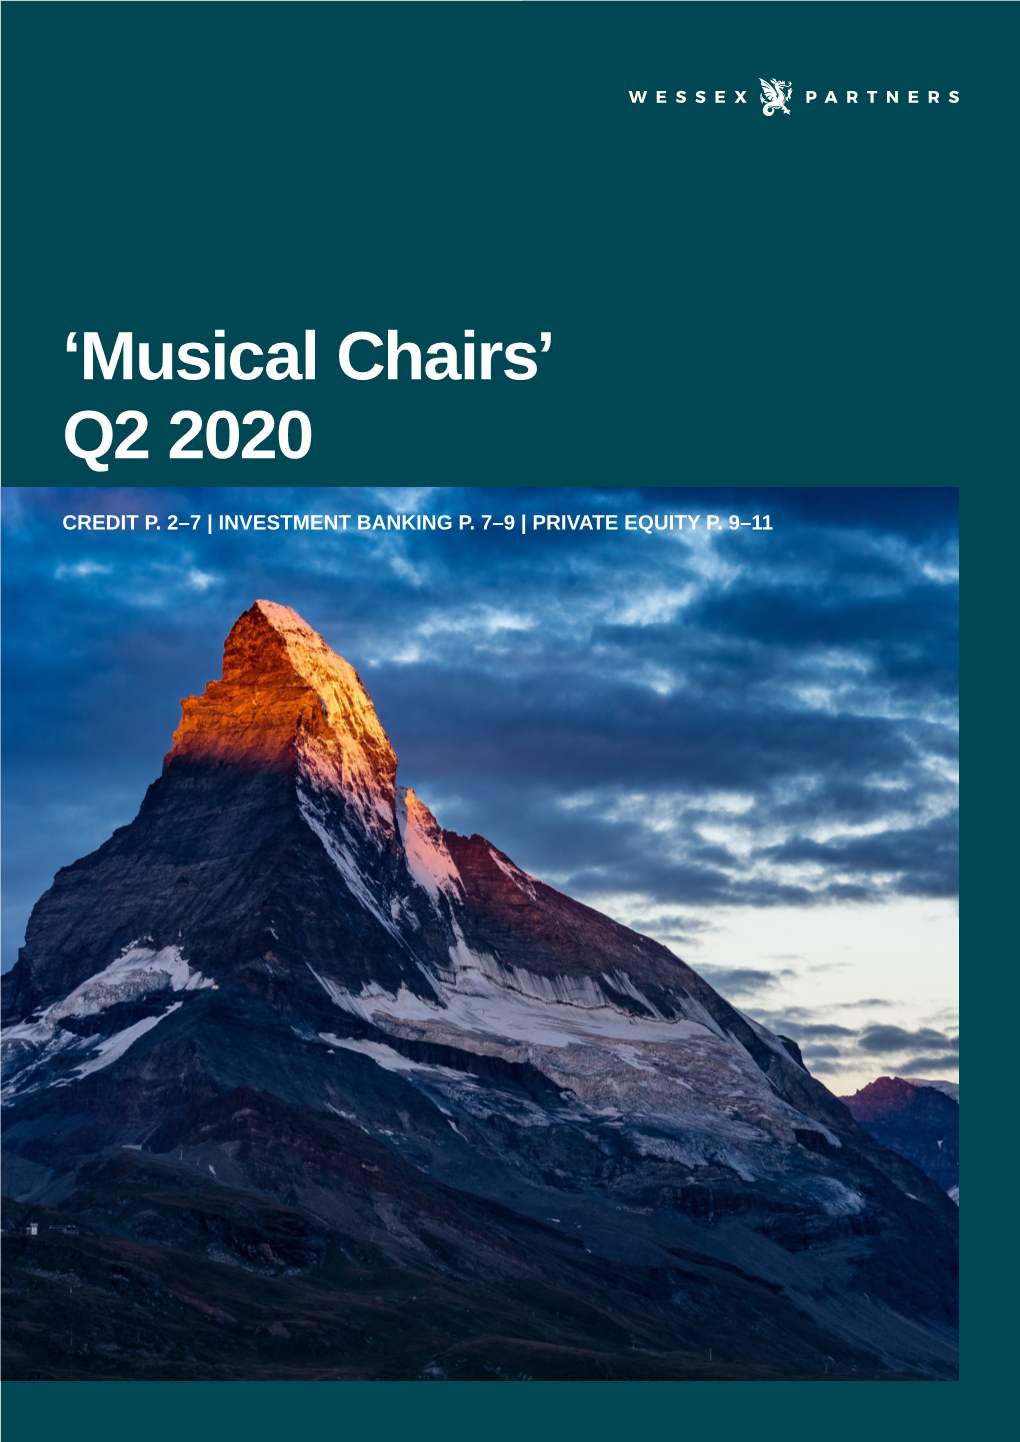 Wessex-Partners-Musical-Chairs-Q2